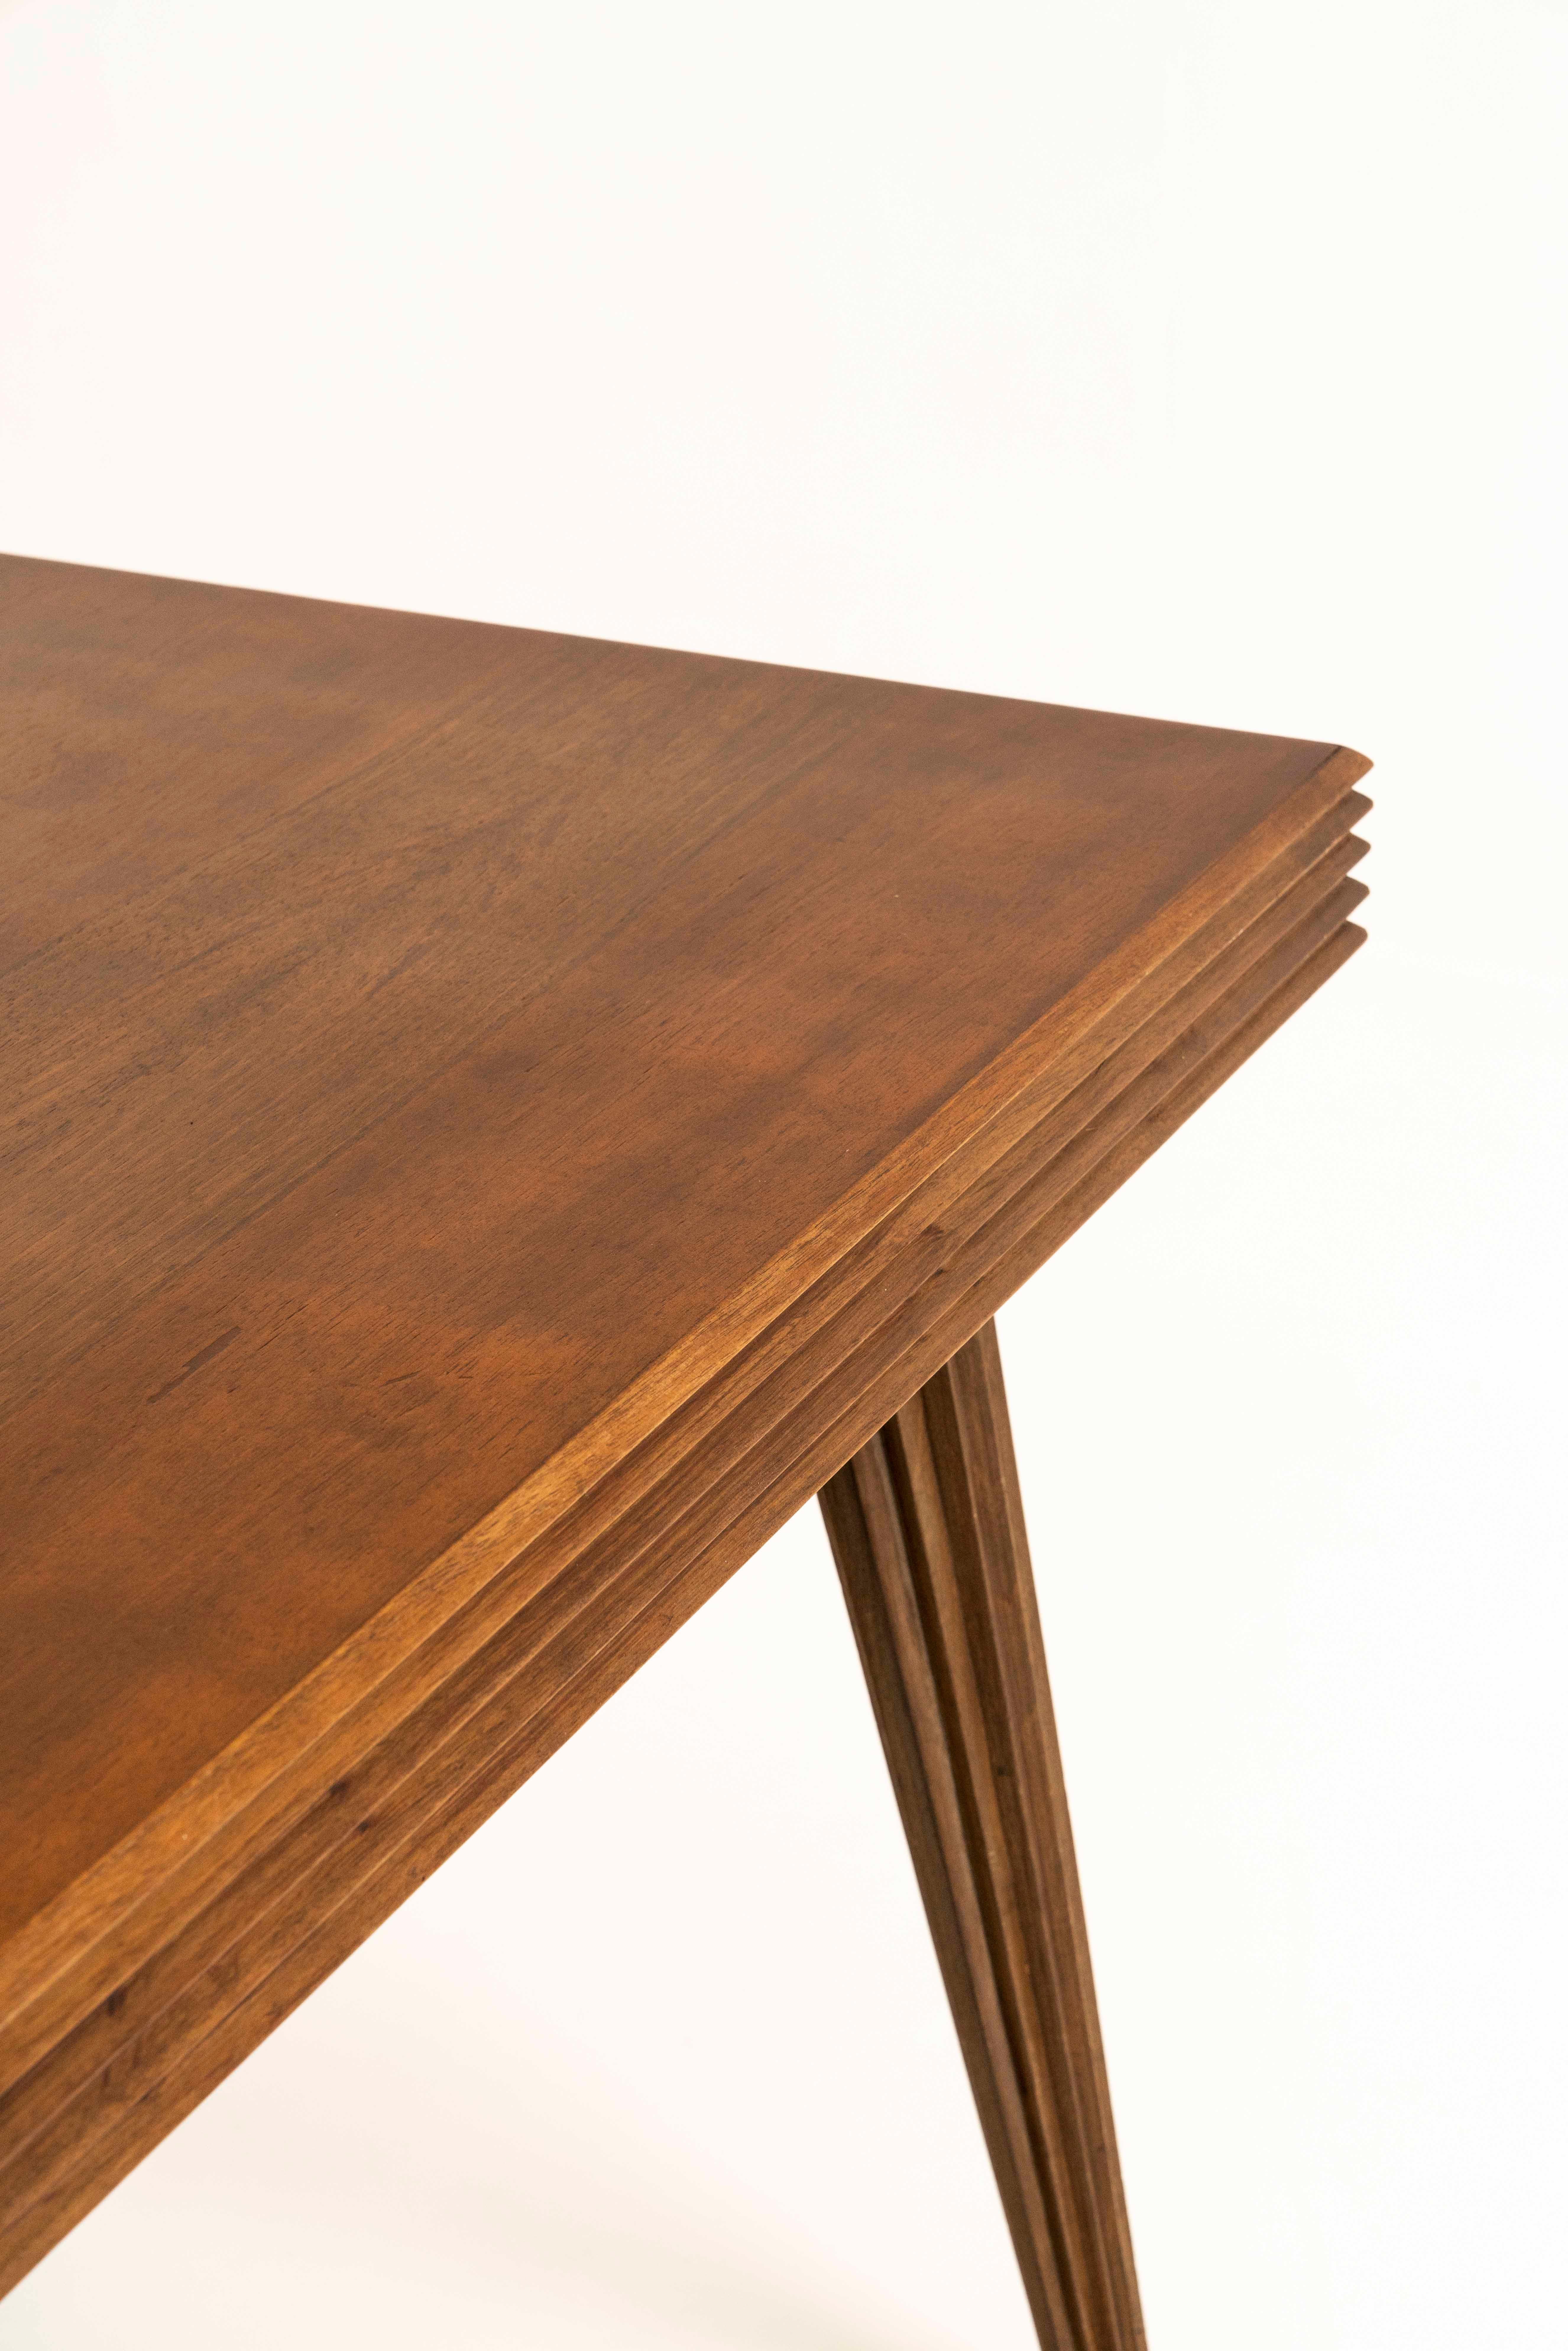 Gio Ponti Dining Table in Veneered Walnut, Italy 1940s For Sale 1